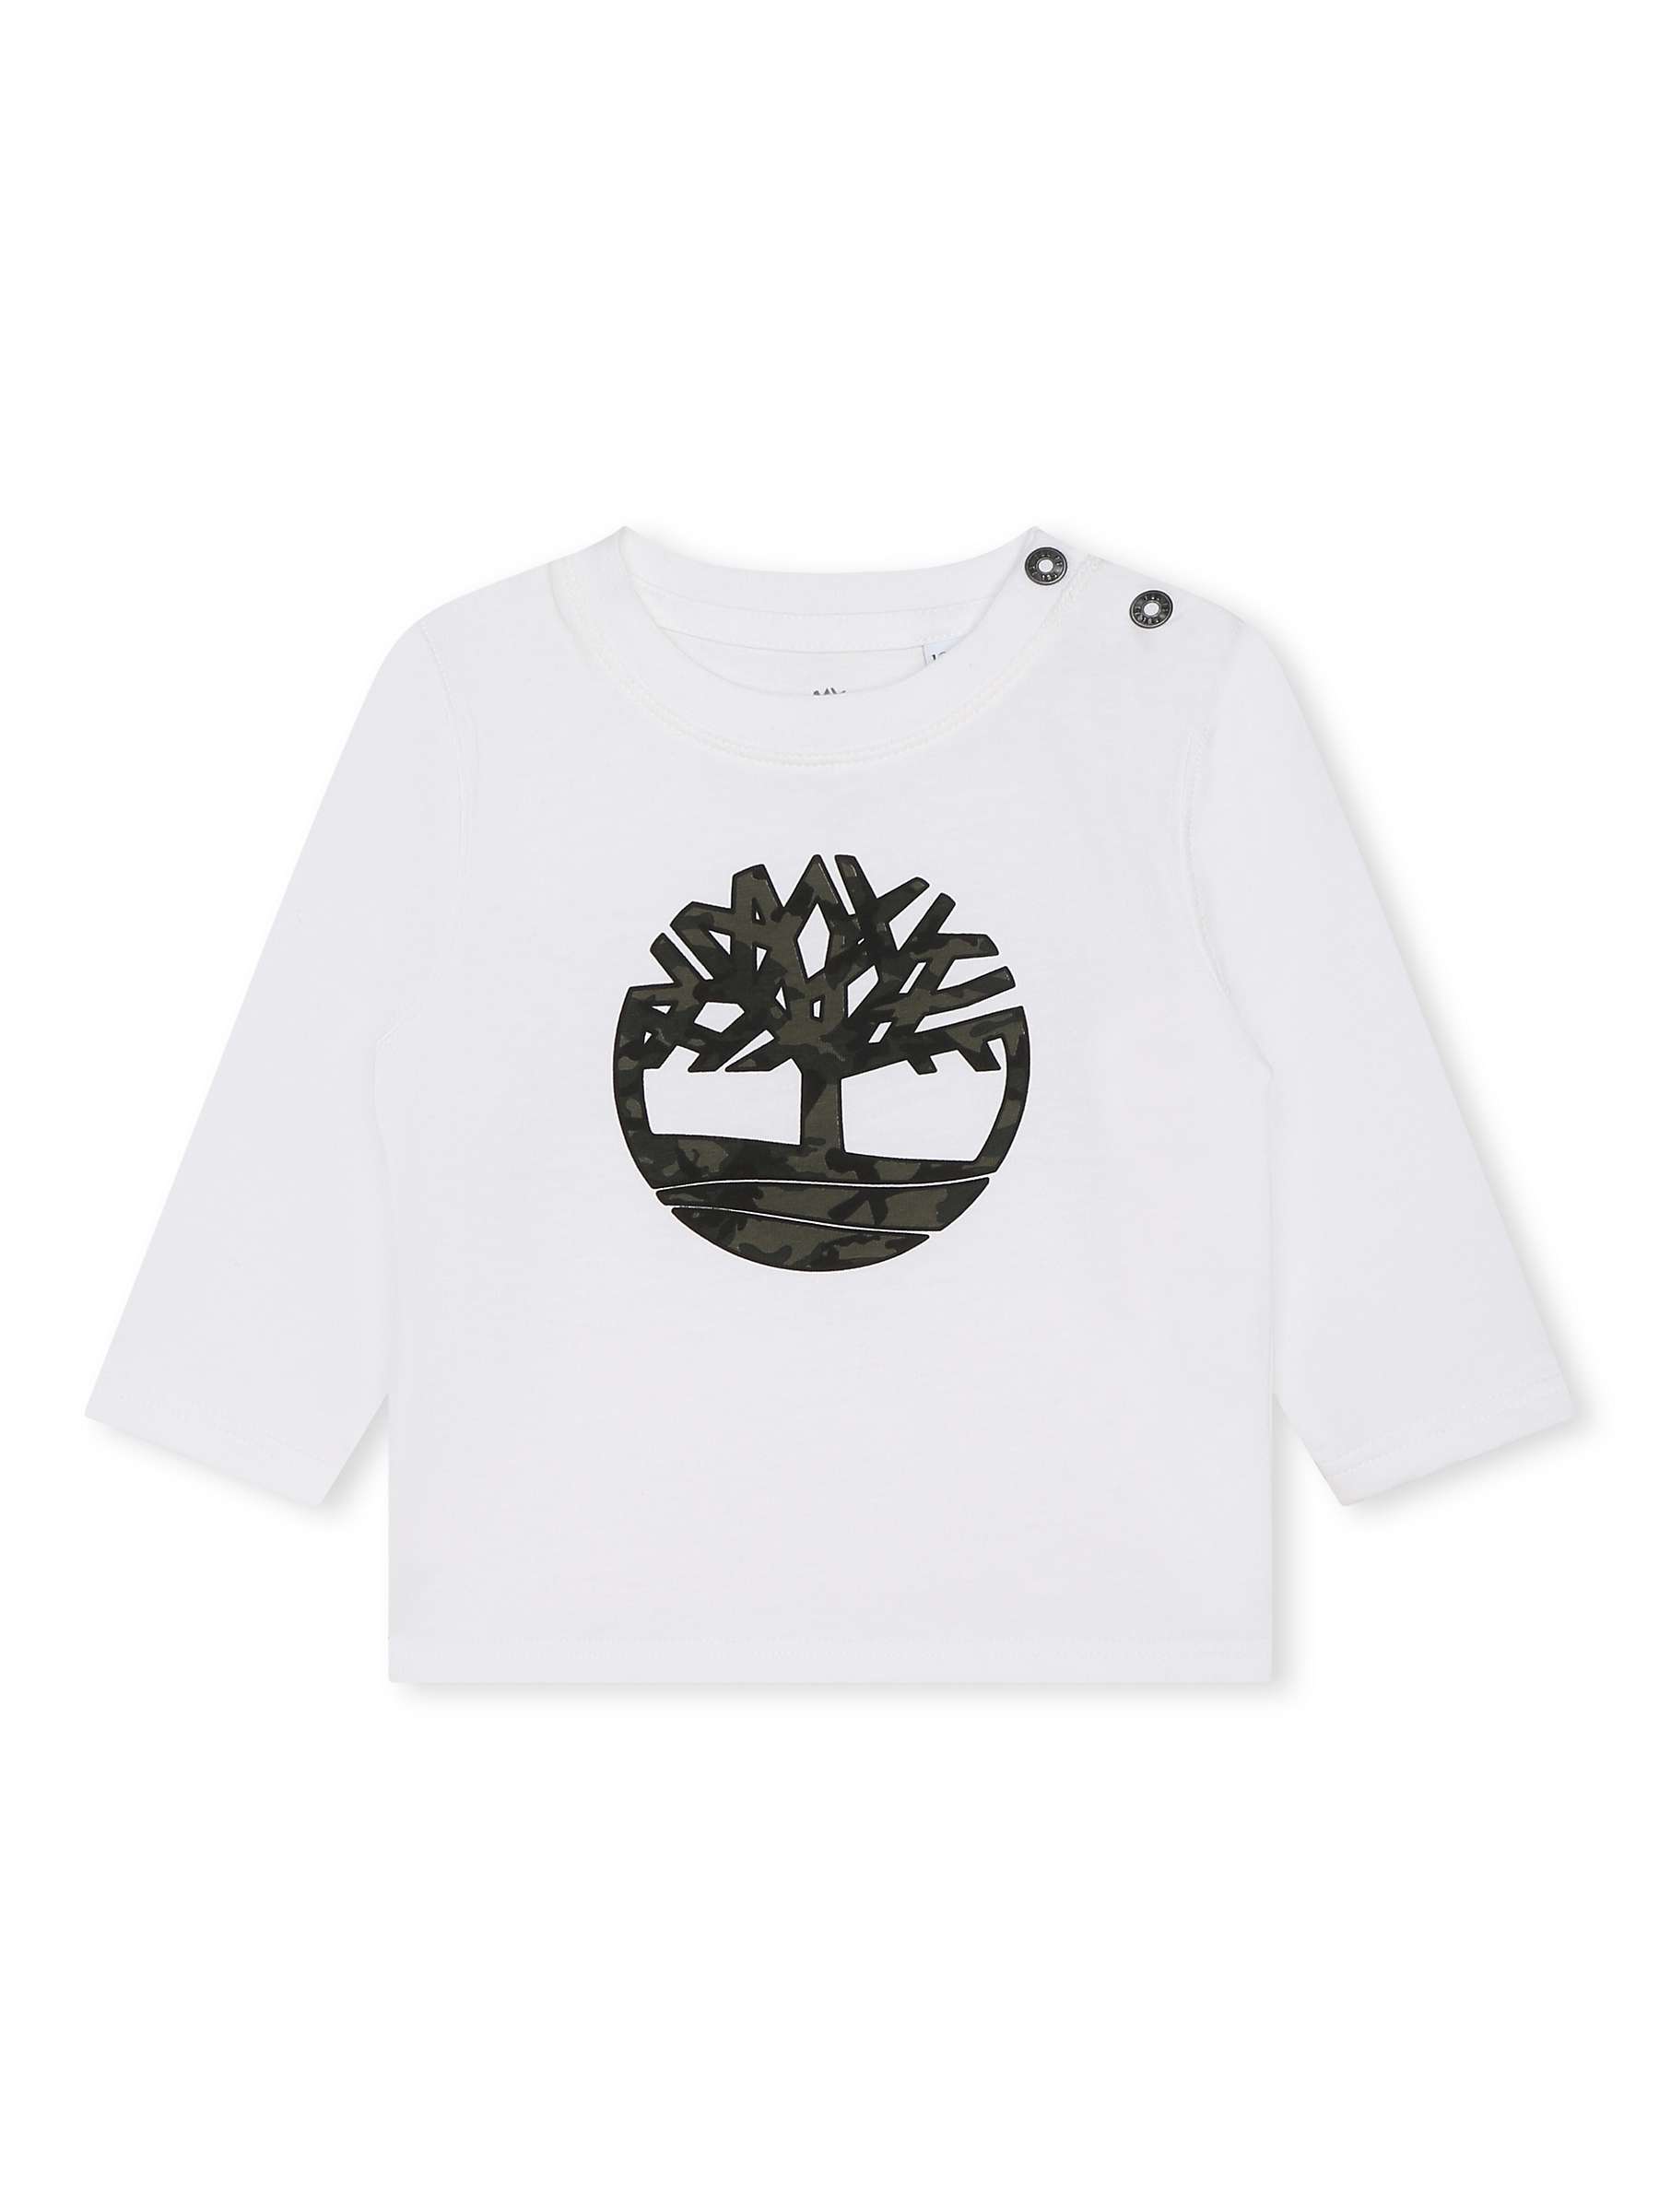 Buy Timberland Baby Graphic Long Sleeve T-Shirt, White Online at johnlewis.com